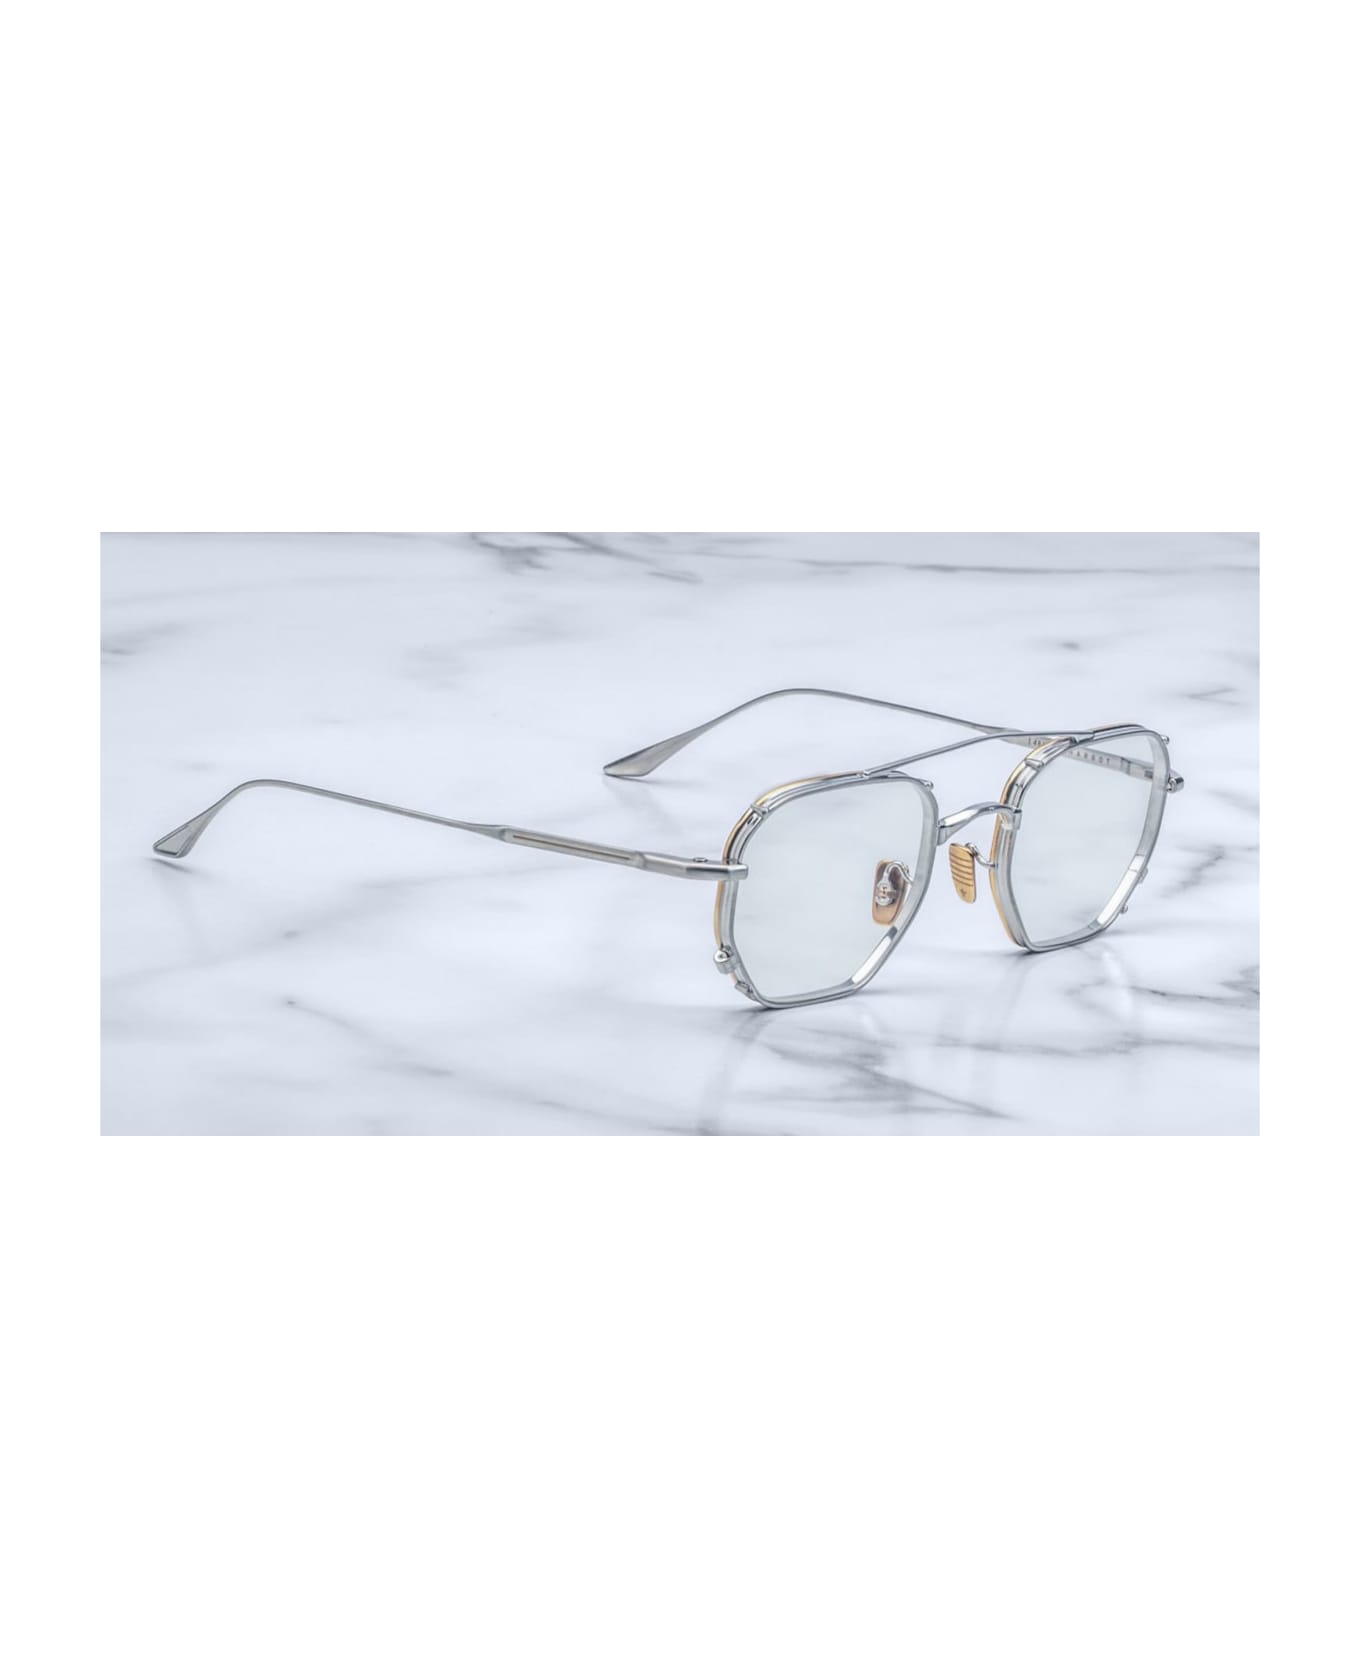 Jacques Marie Mage Marbot - Silver 2 Rx Glasses - Silver